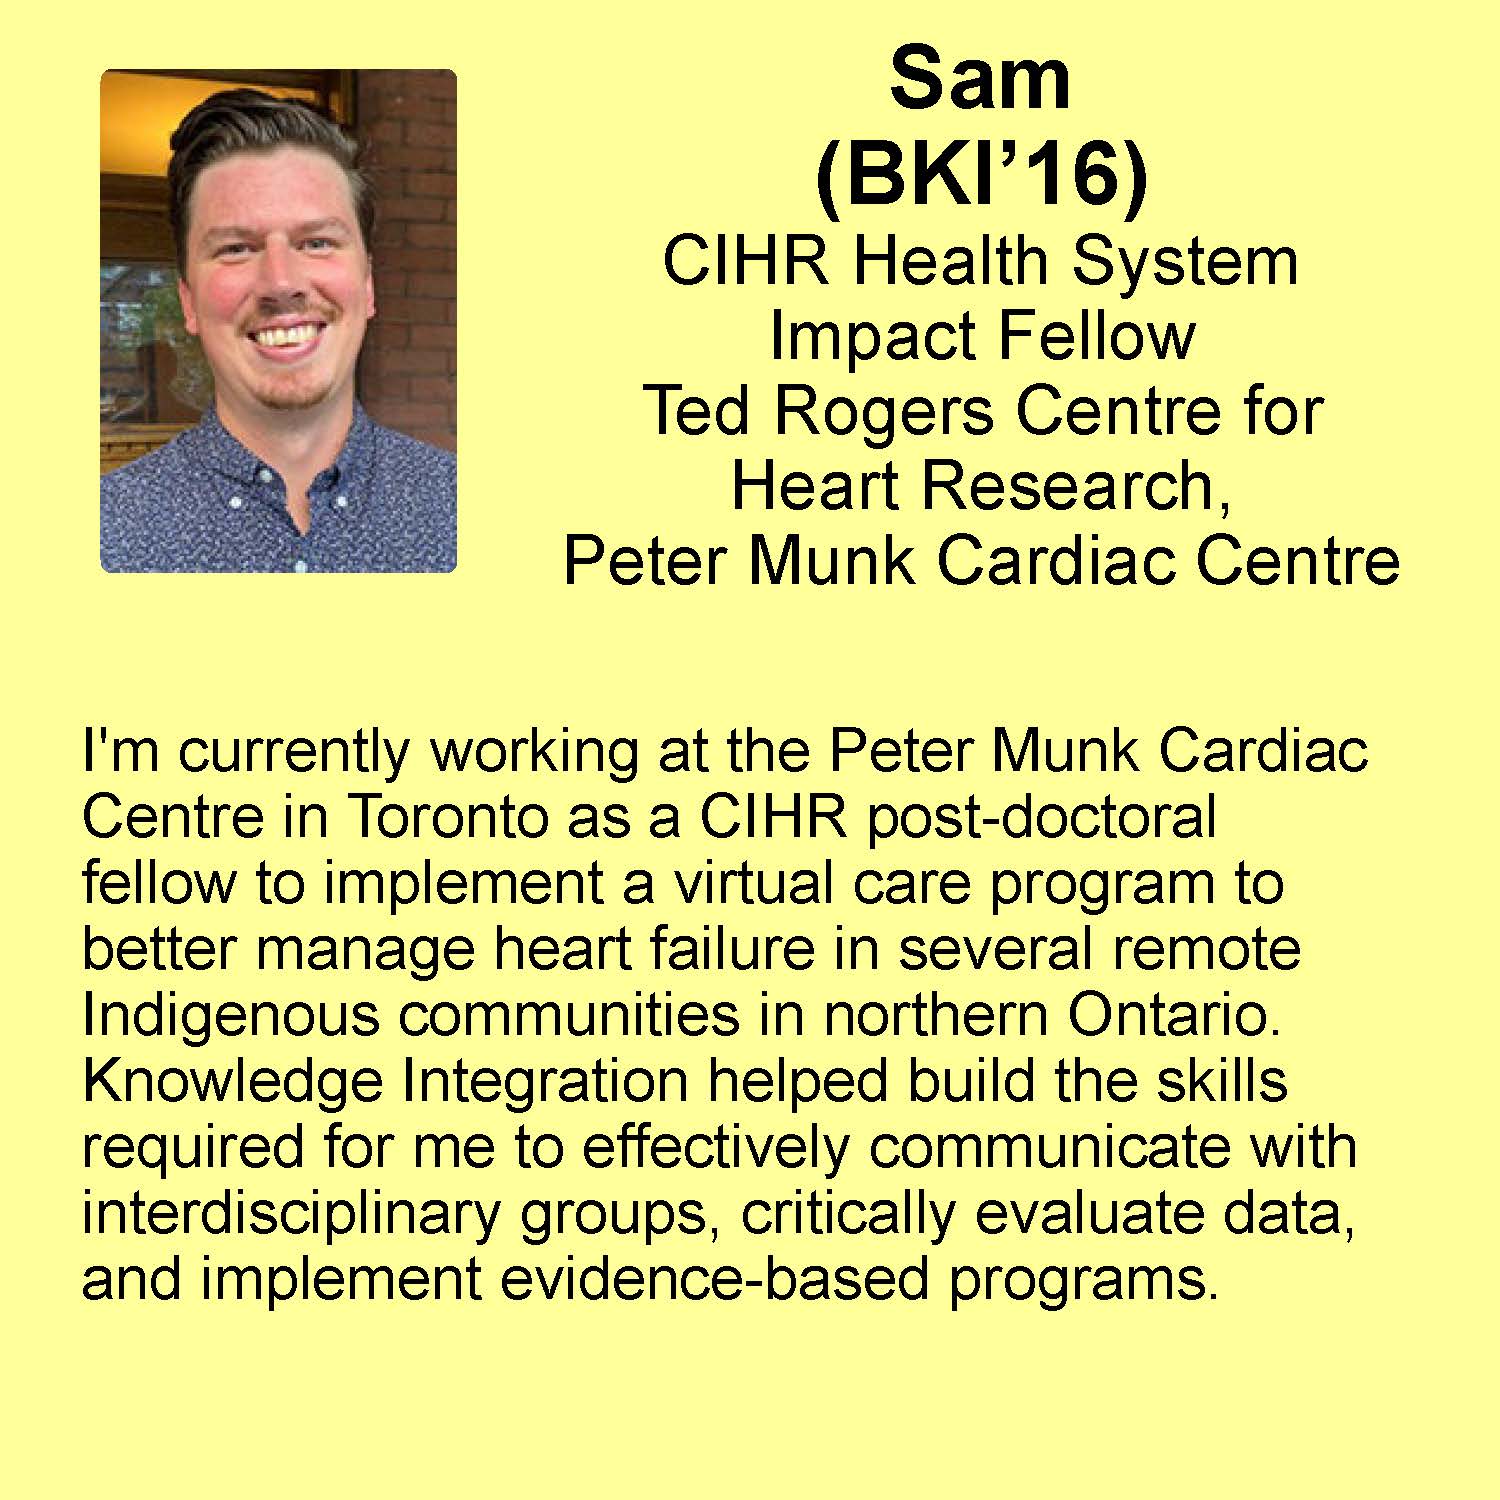 Sam profile CIHR Health System Impact Fellow Ted Rogers Centre for Heart Research - Peter Munk Cardiac Centre 